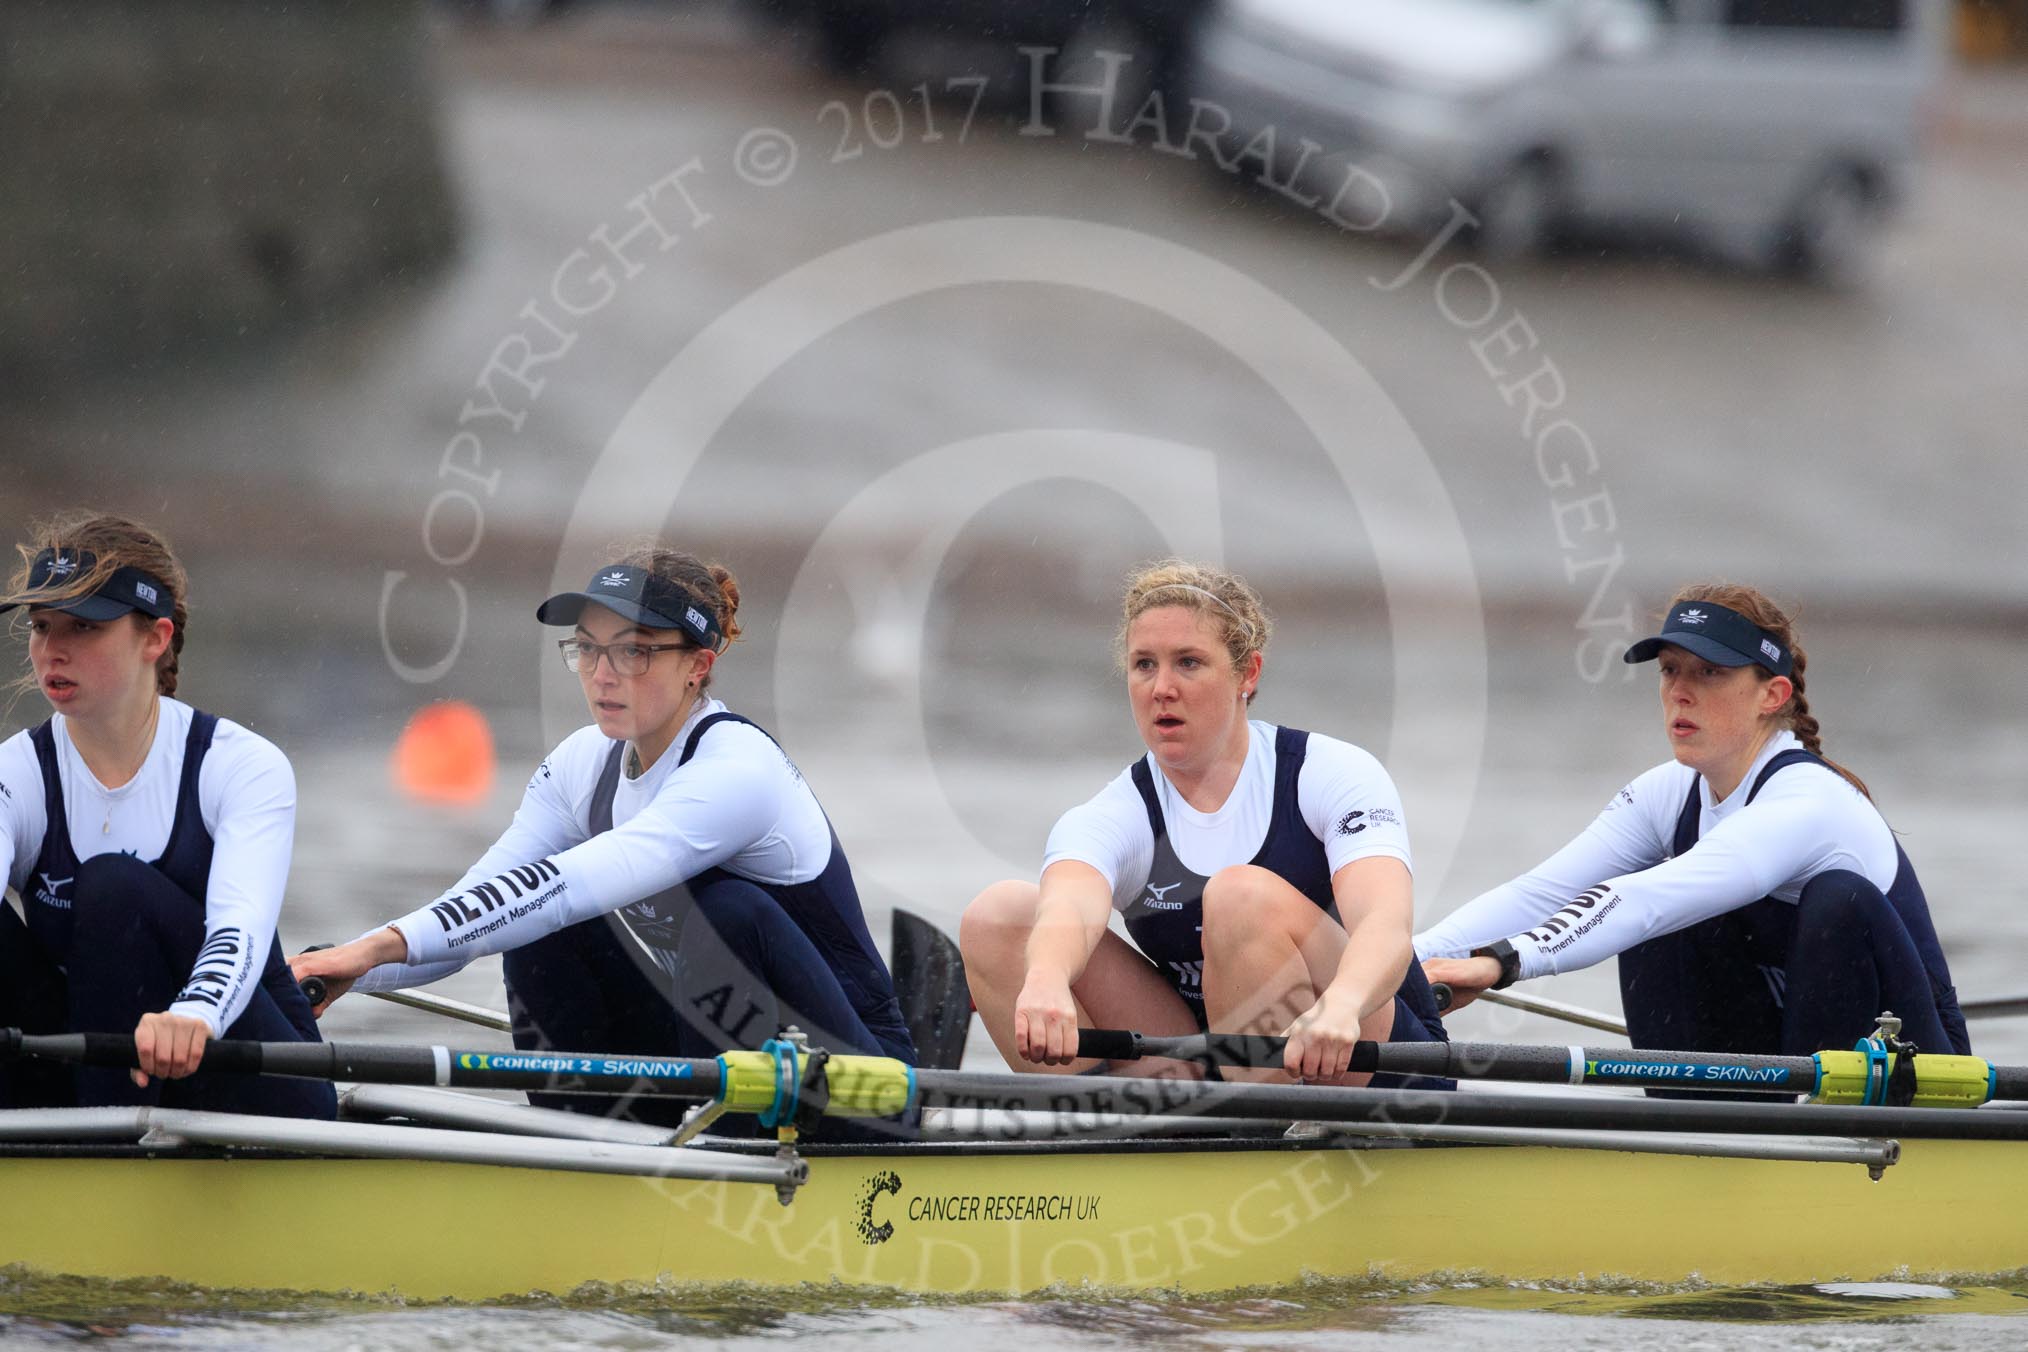 The Boat Race season 2018 - Women's Boat Race Trial Eights (OUWBC, Oxford): "Coursing River" - 7 Juliette Perry, 6 Katherine Erickson, 5 Morgan McGovern, 4 Anna Murgatroyd.
River Thames between Putney Bridge and Mortlake,
London SW15,

United Kingdom,
on 21 January 2018 at 14:28, image #60